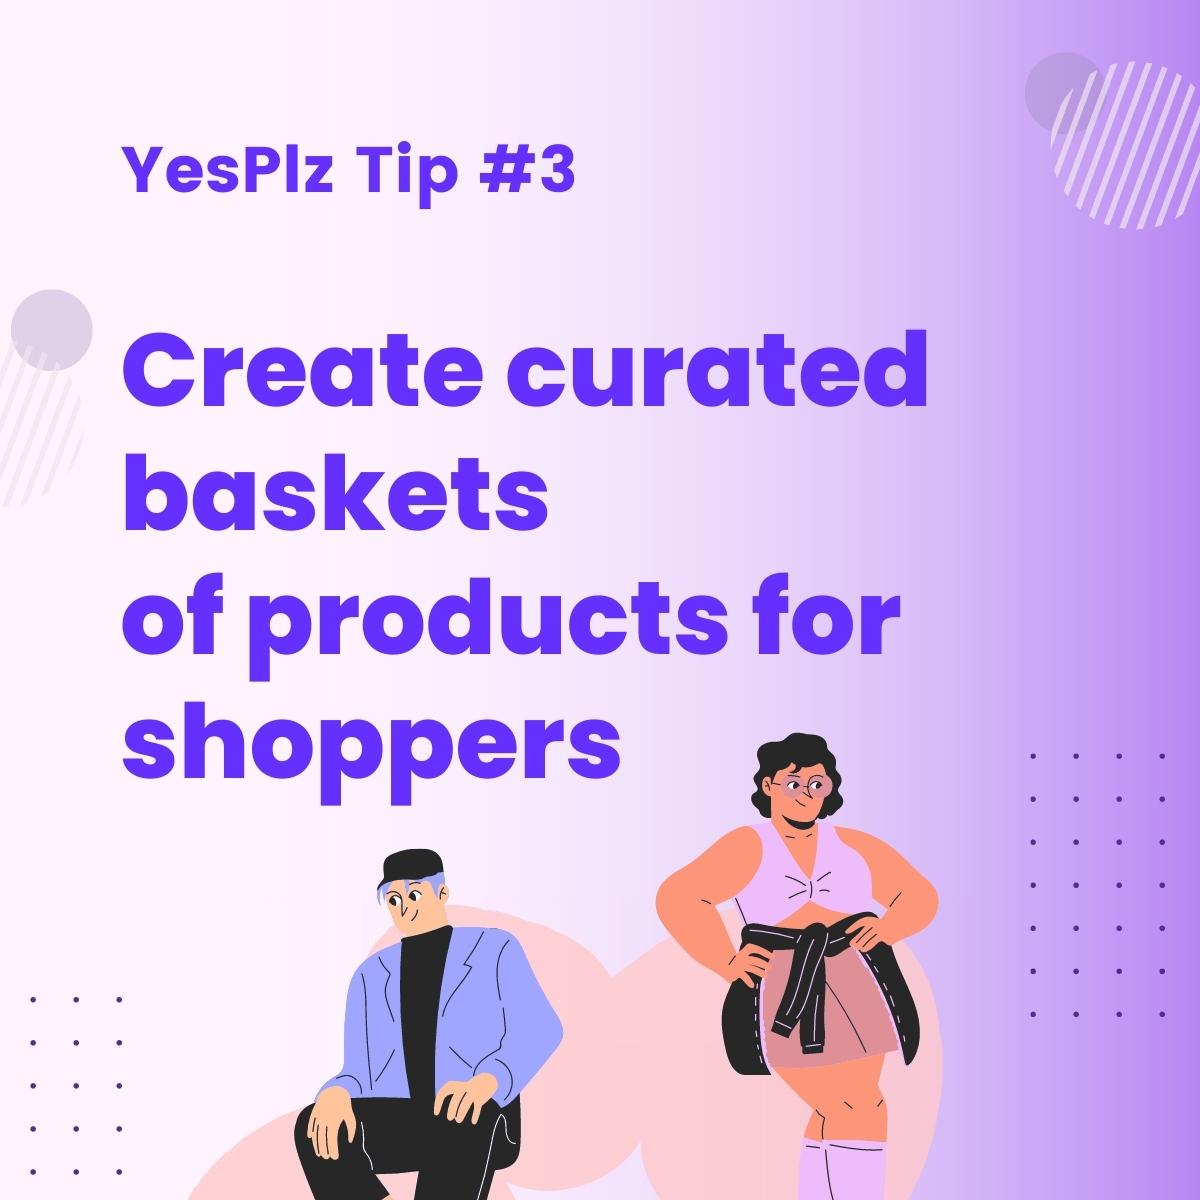 YesPlz Tip 3 to create baskets of curated products for shoppers